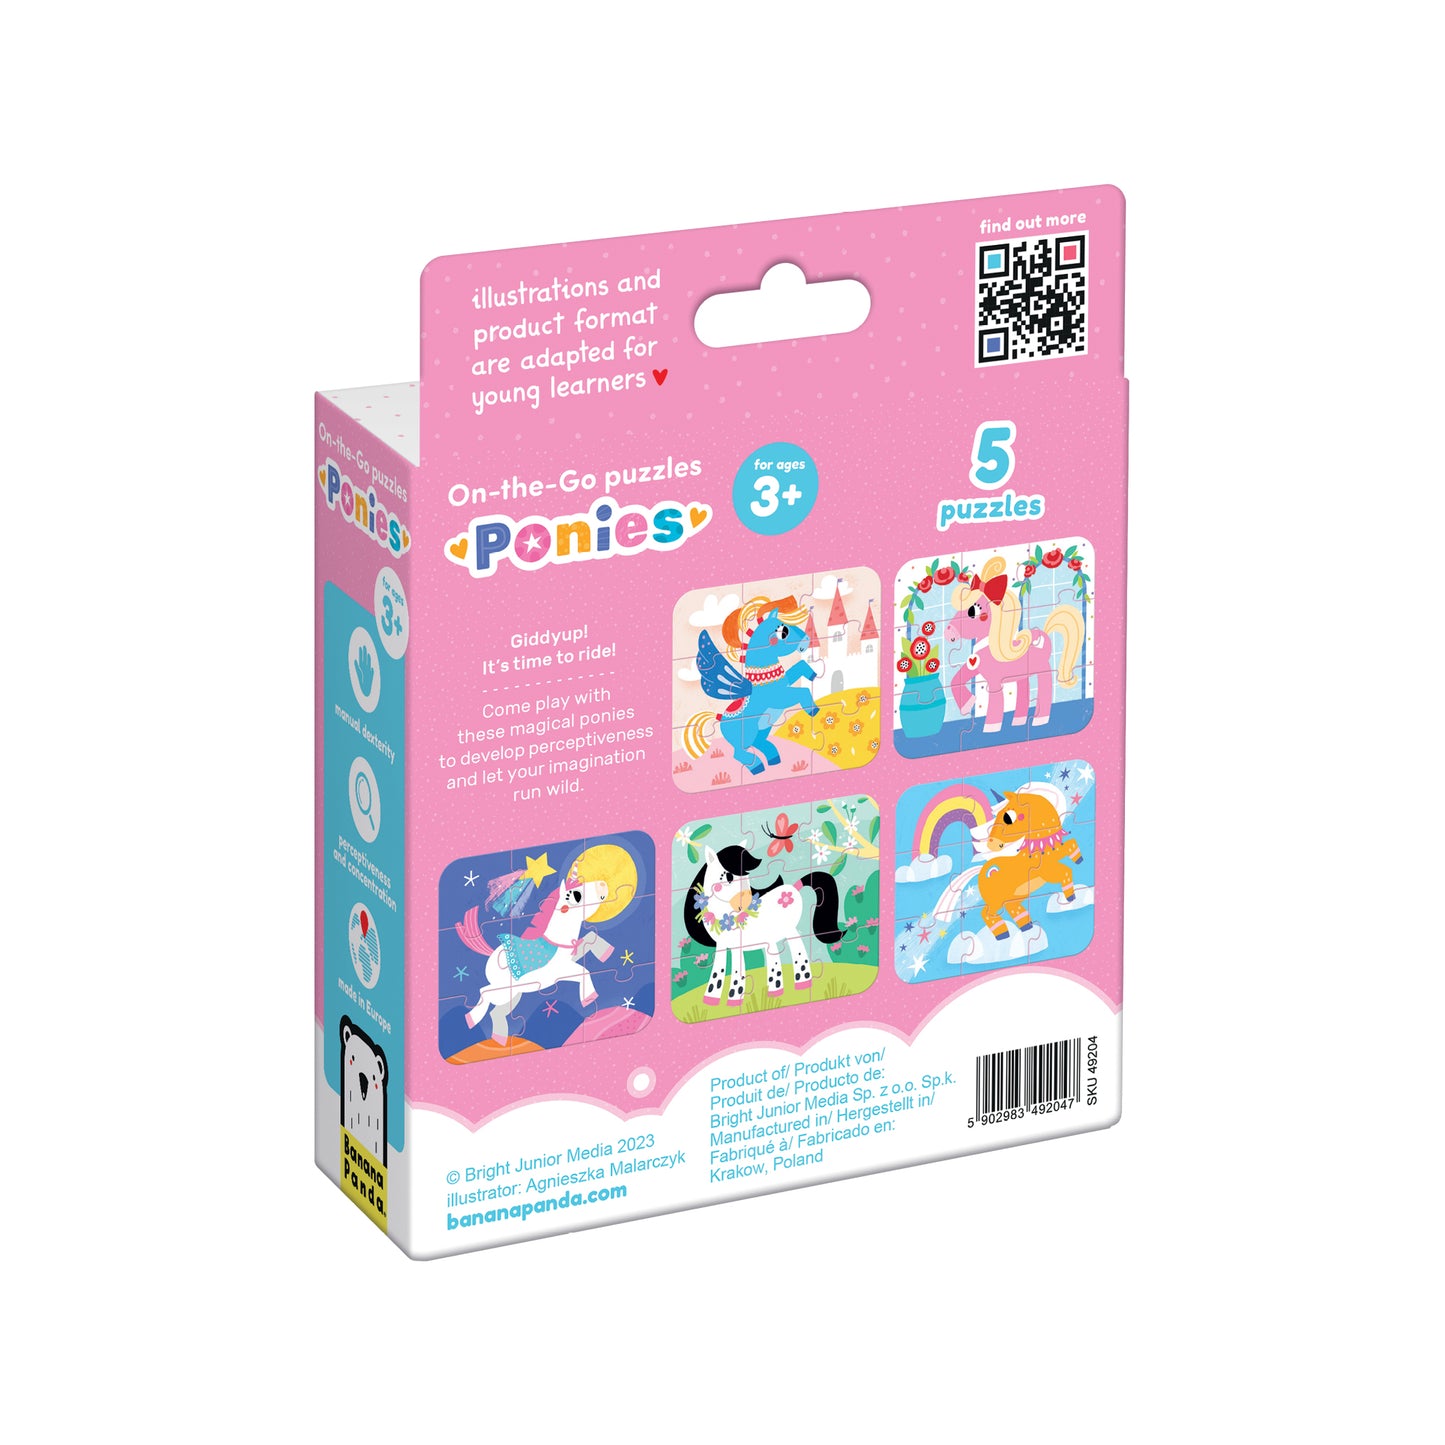 On-the-Go Puzzles Ponies